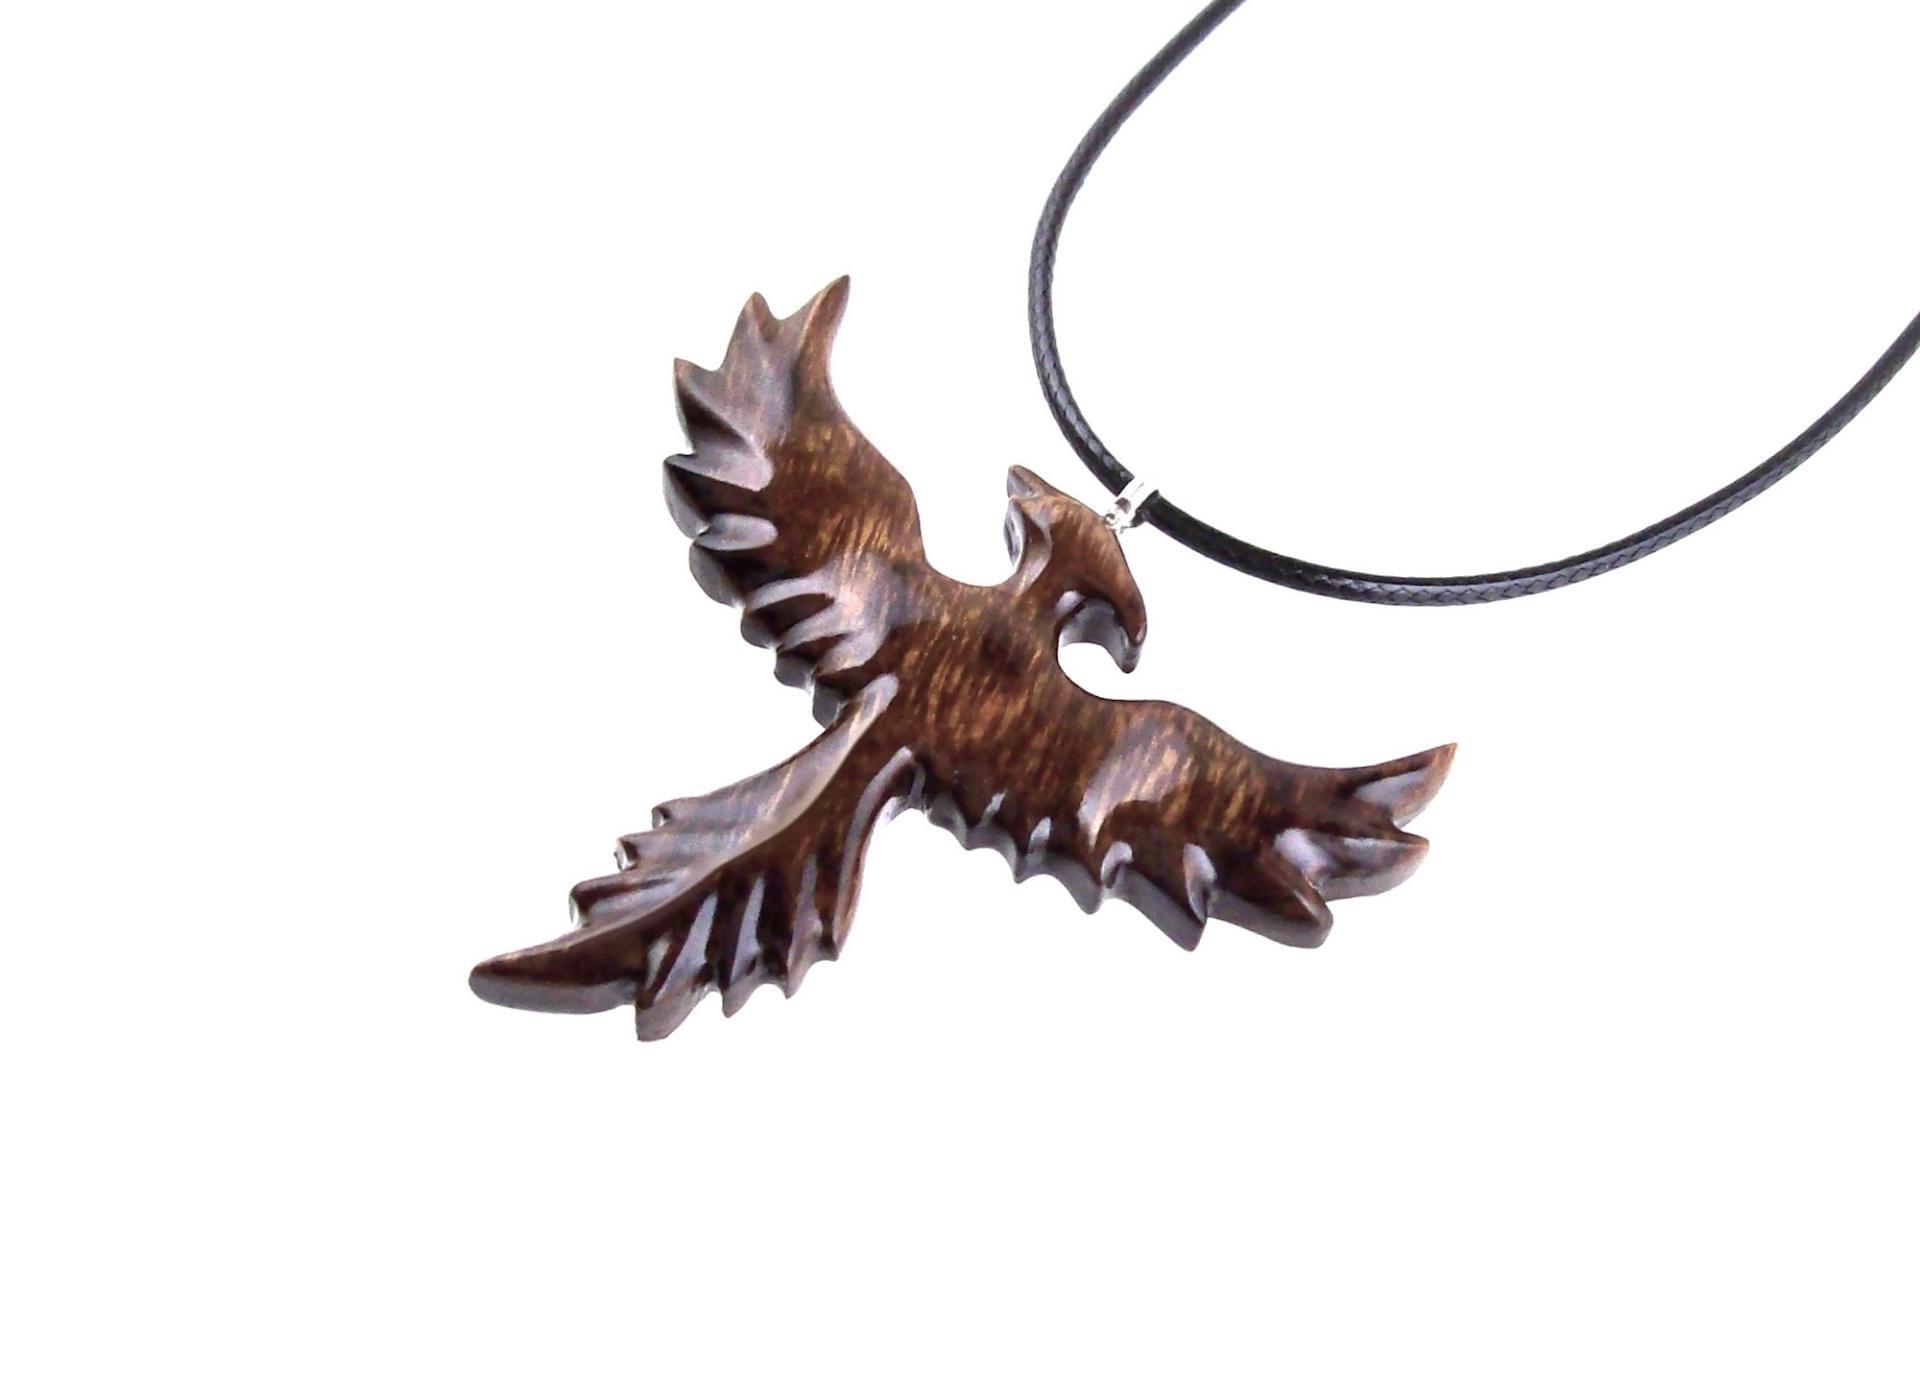 Rising Phoenix Necklace, Hand Carved Wooden Phoenix Pendant, Fantasy Wood Jewelry, Firebird Inspirational Gift for Him Her